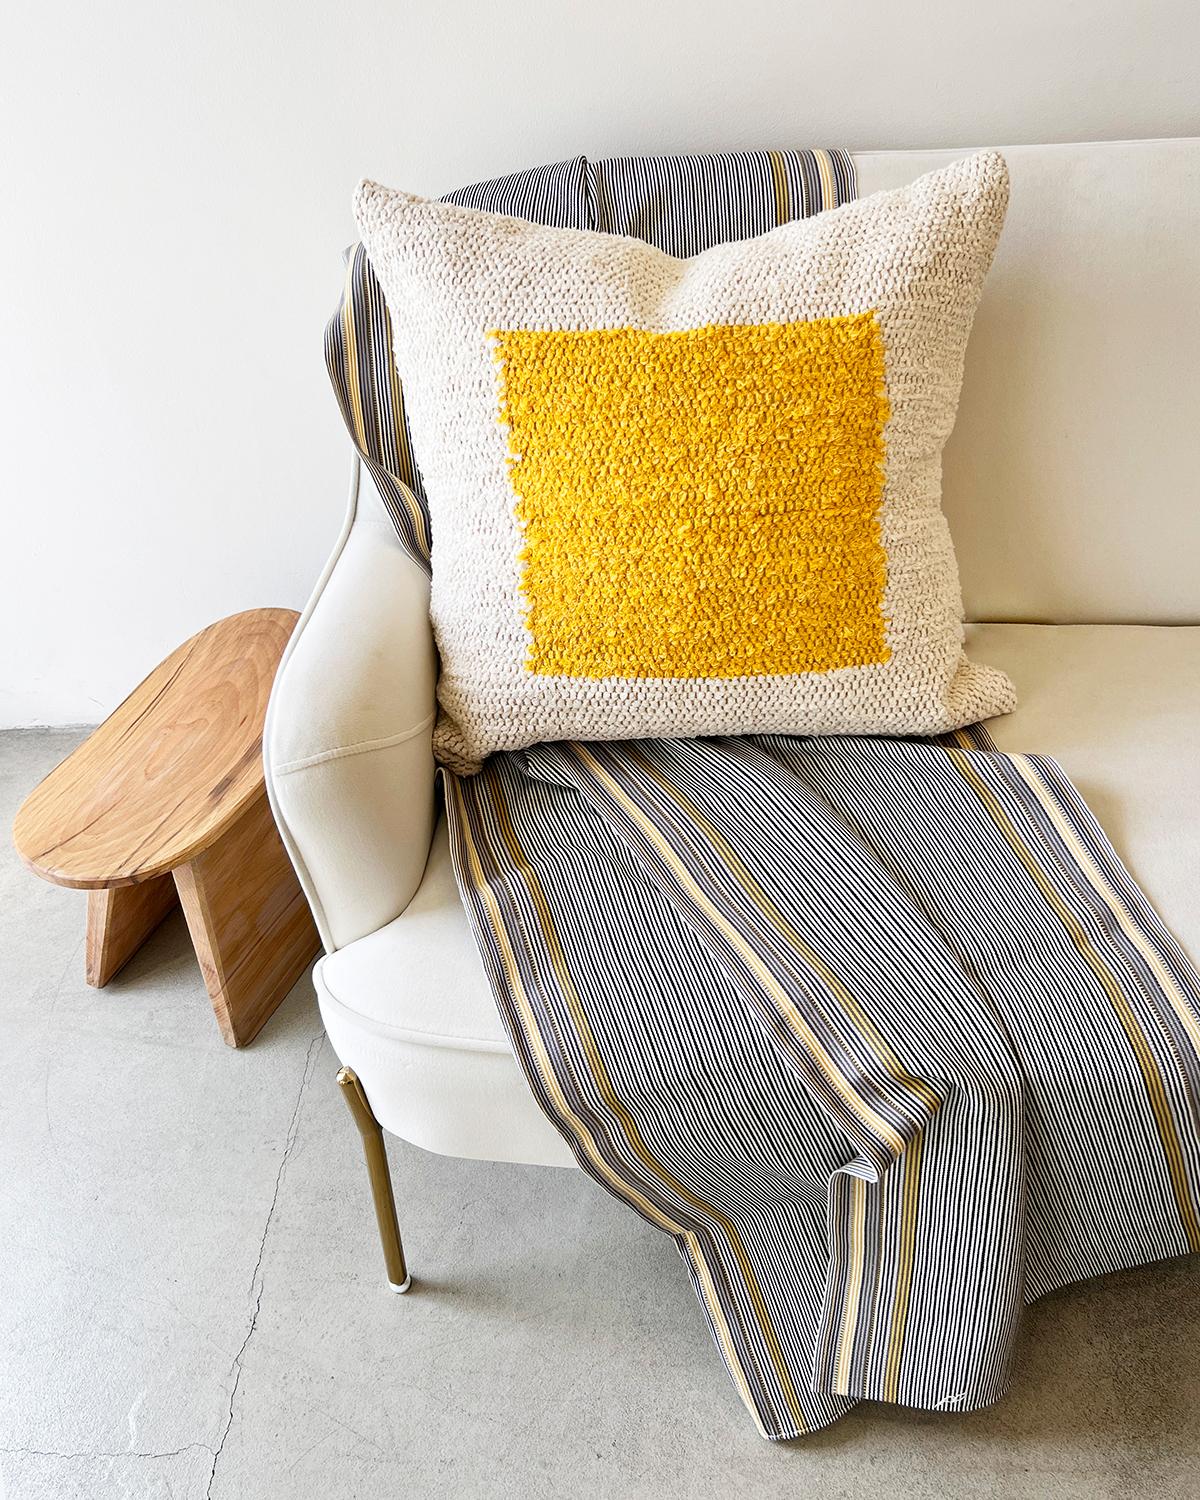 A geometric textured throw pillow for your couch or bed. This yellow and cream cotton throw pillow is made from this handwoven cotton and is perfect for a high traffic area like the living room couch. Put two matching pillows on either side of the